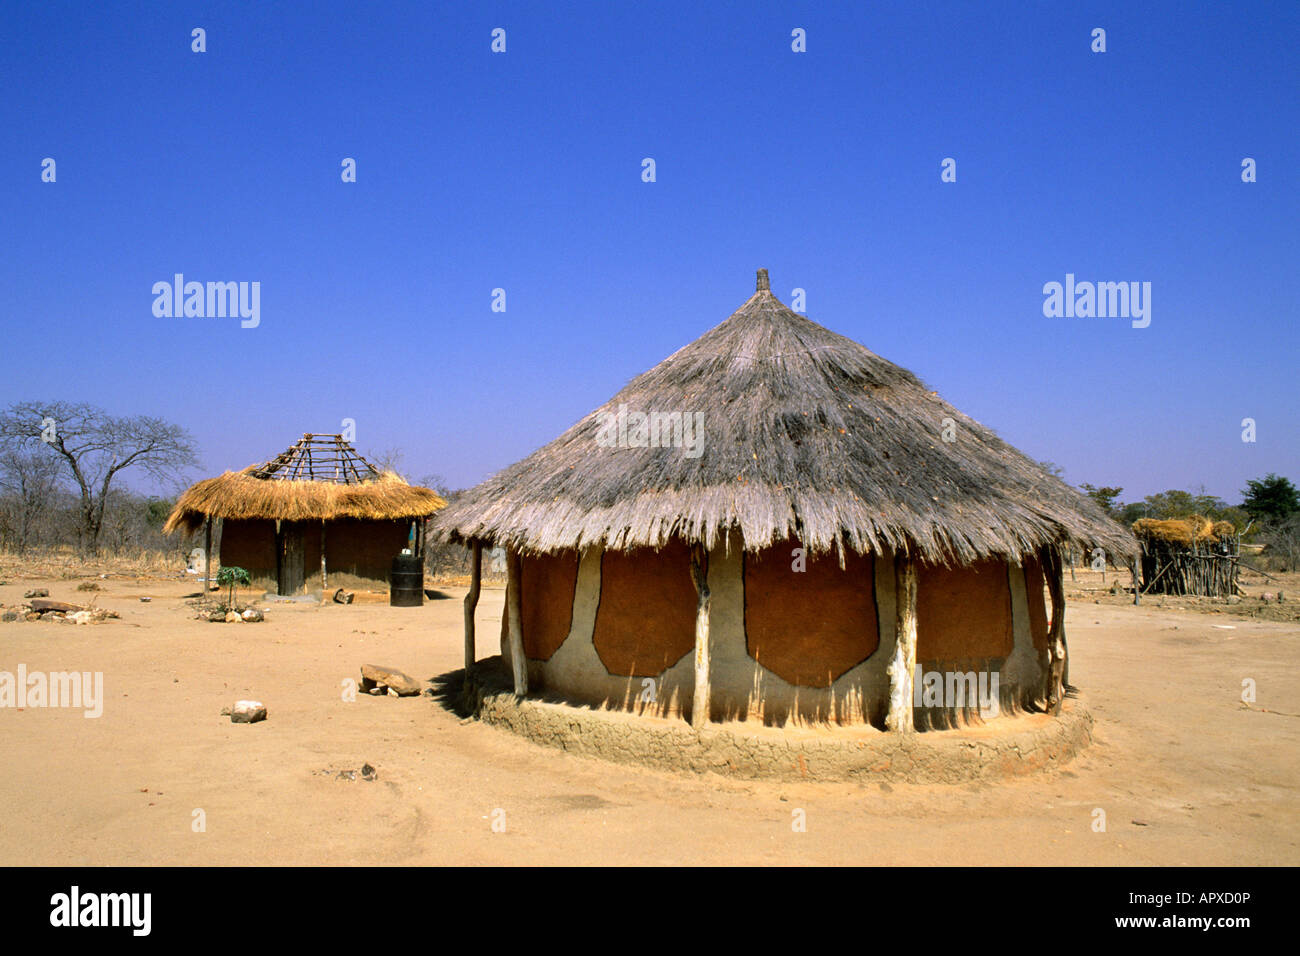 Traditional mud and thatched hut in Zimbabwe Stock Photo